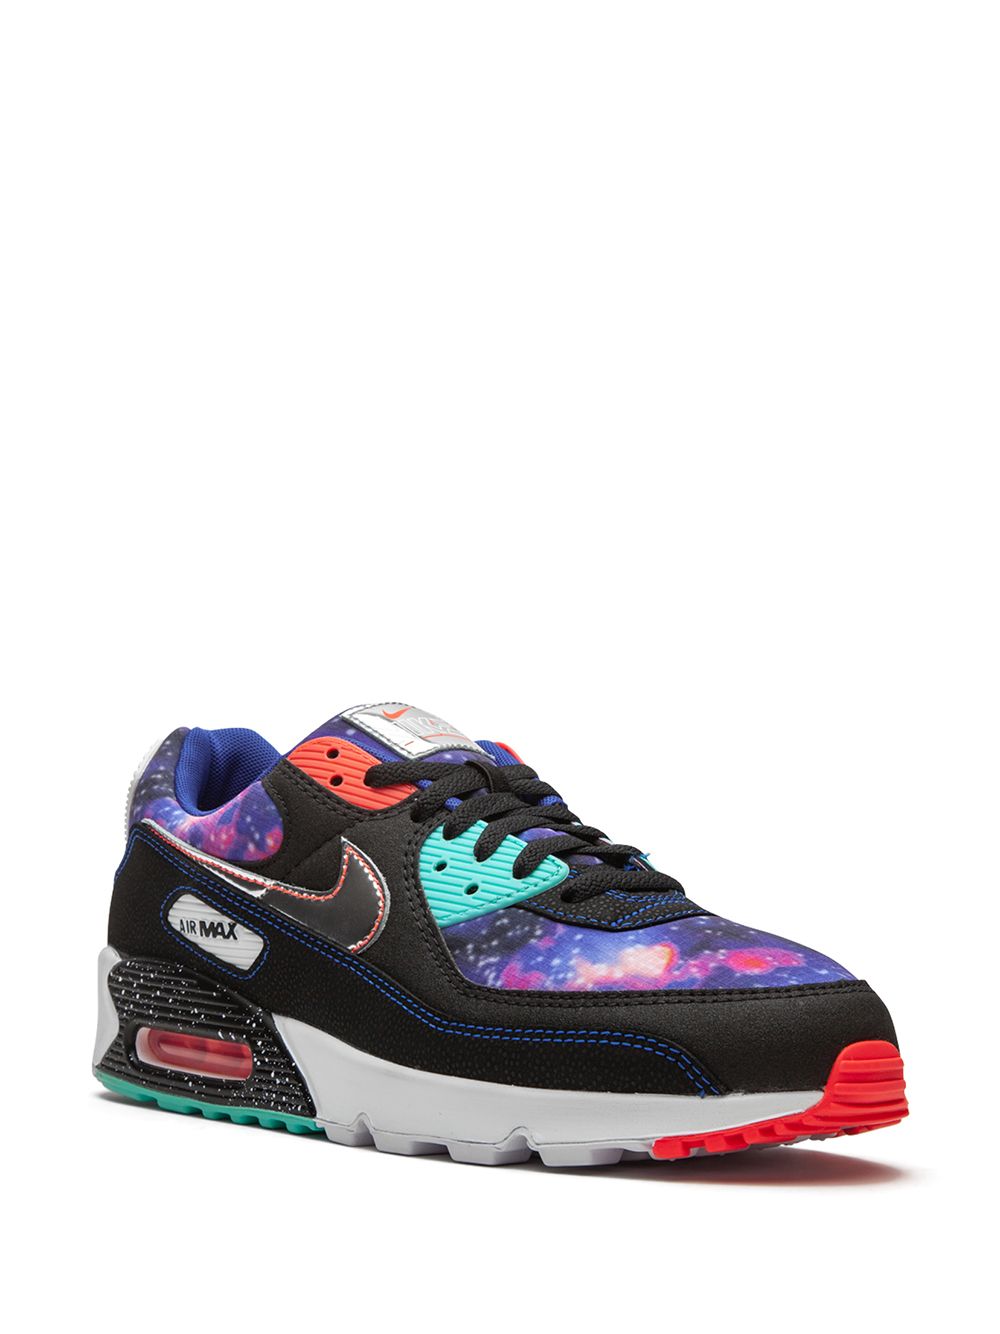 Shop Nike Air Max 90 "Supernova Galaxy" sneakers with Express Delivery FARFETCH